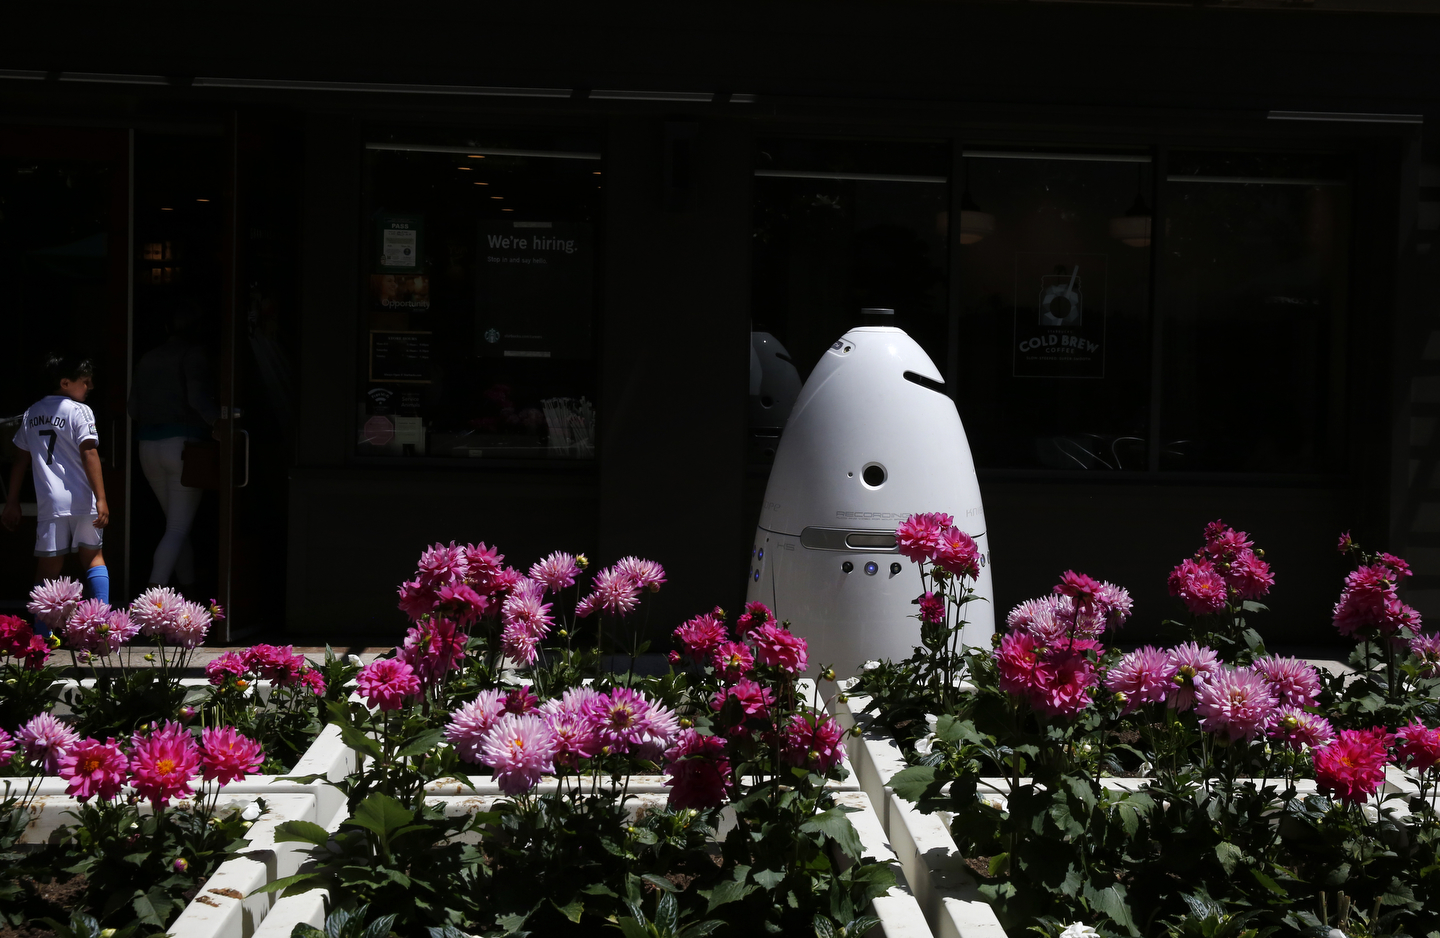 A Knightscope K5 autonomous security robot roams around the Stanford Shopping Center June 15, 2016 in Palo Alto, Calif.